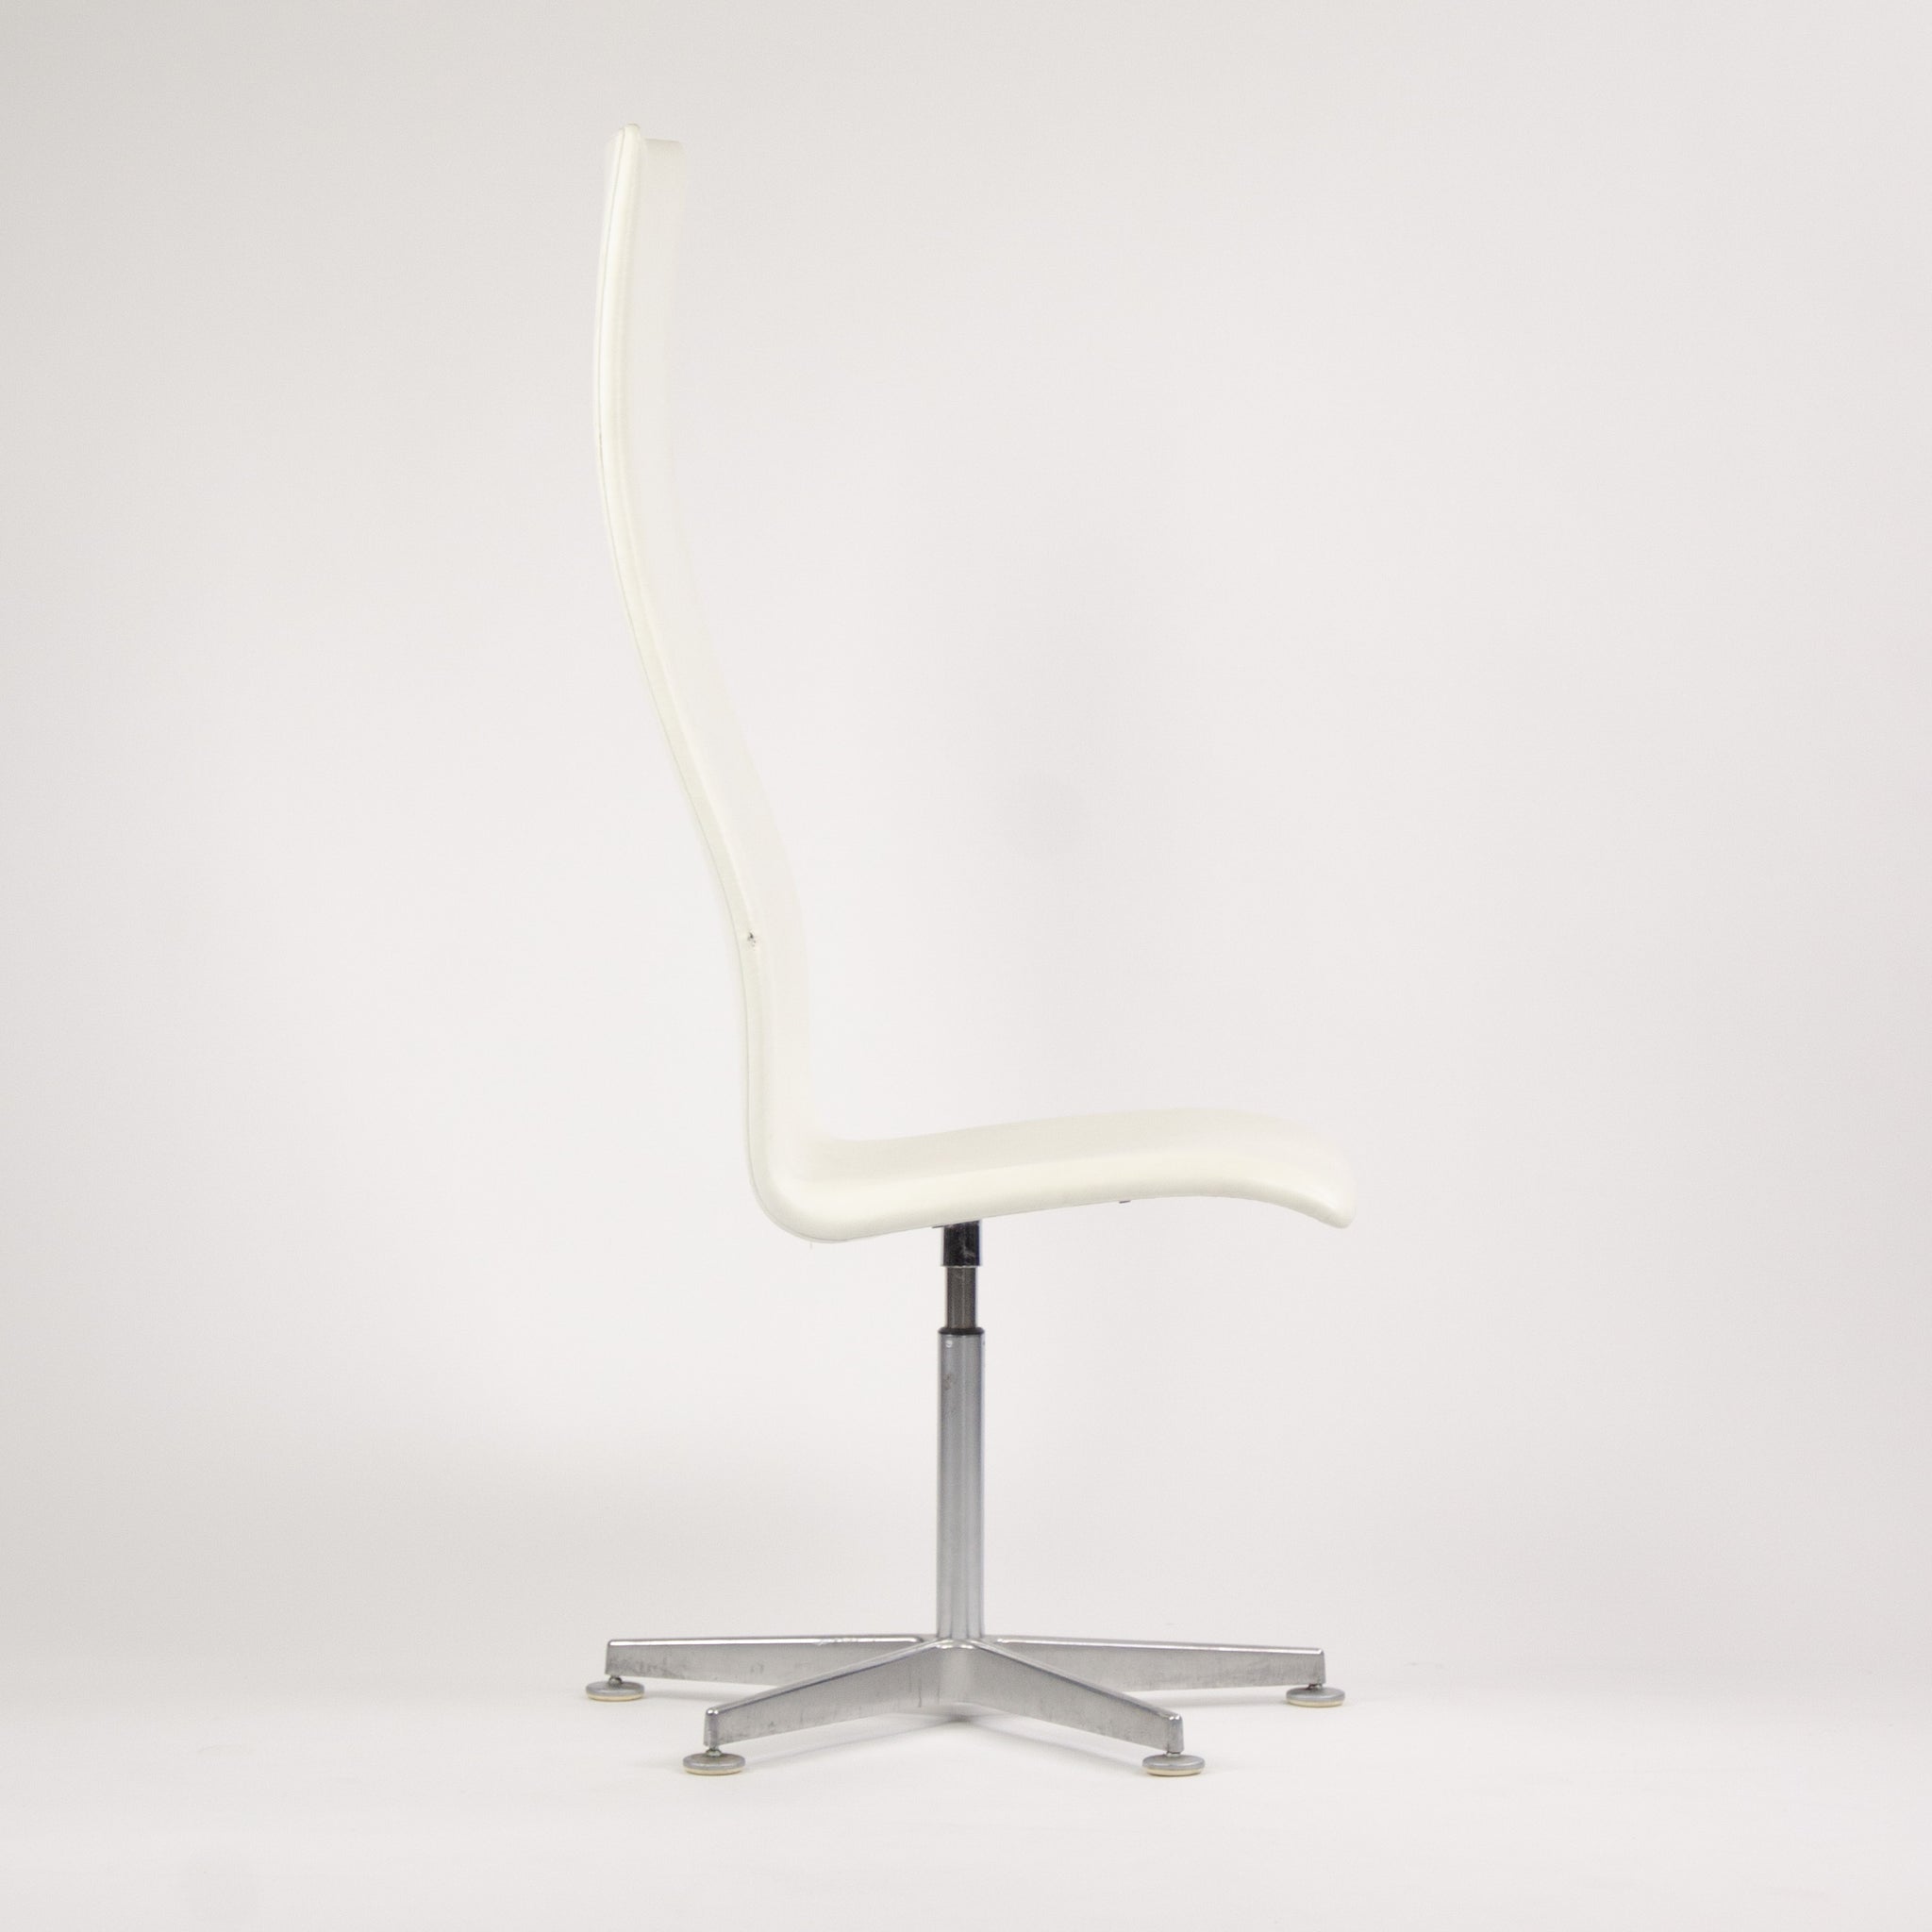 Fritz Hansen Arne Jacobsen Tall Oxford Chair White Leather 2007 4x Available